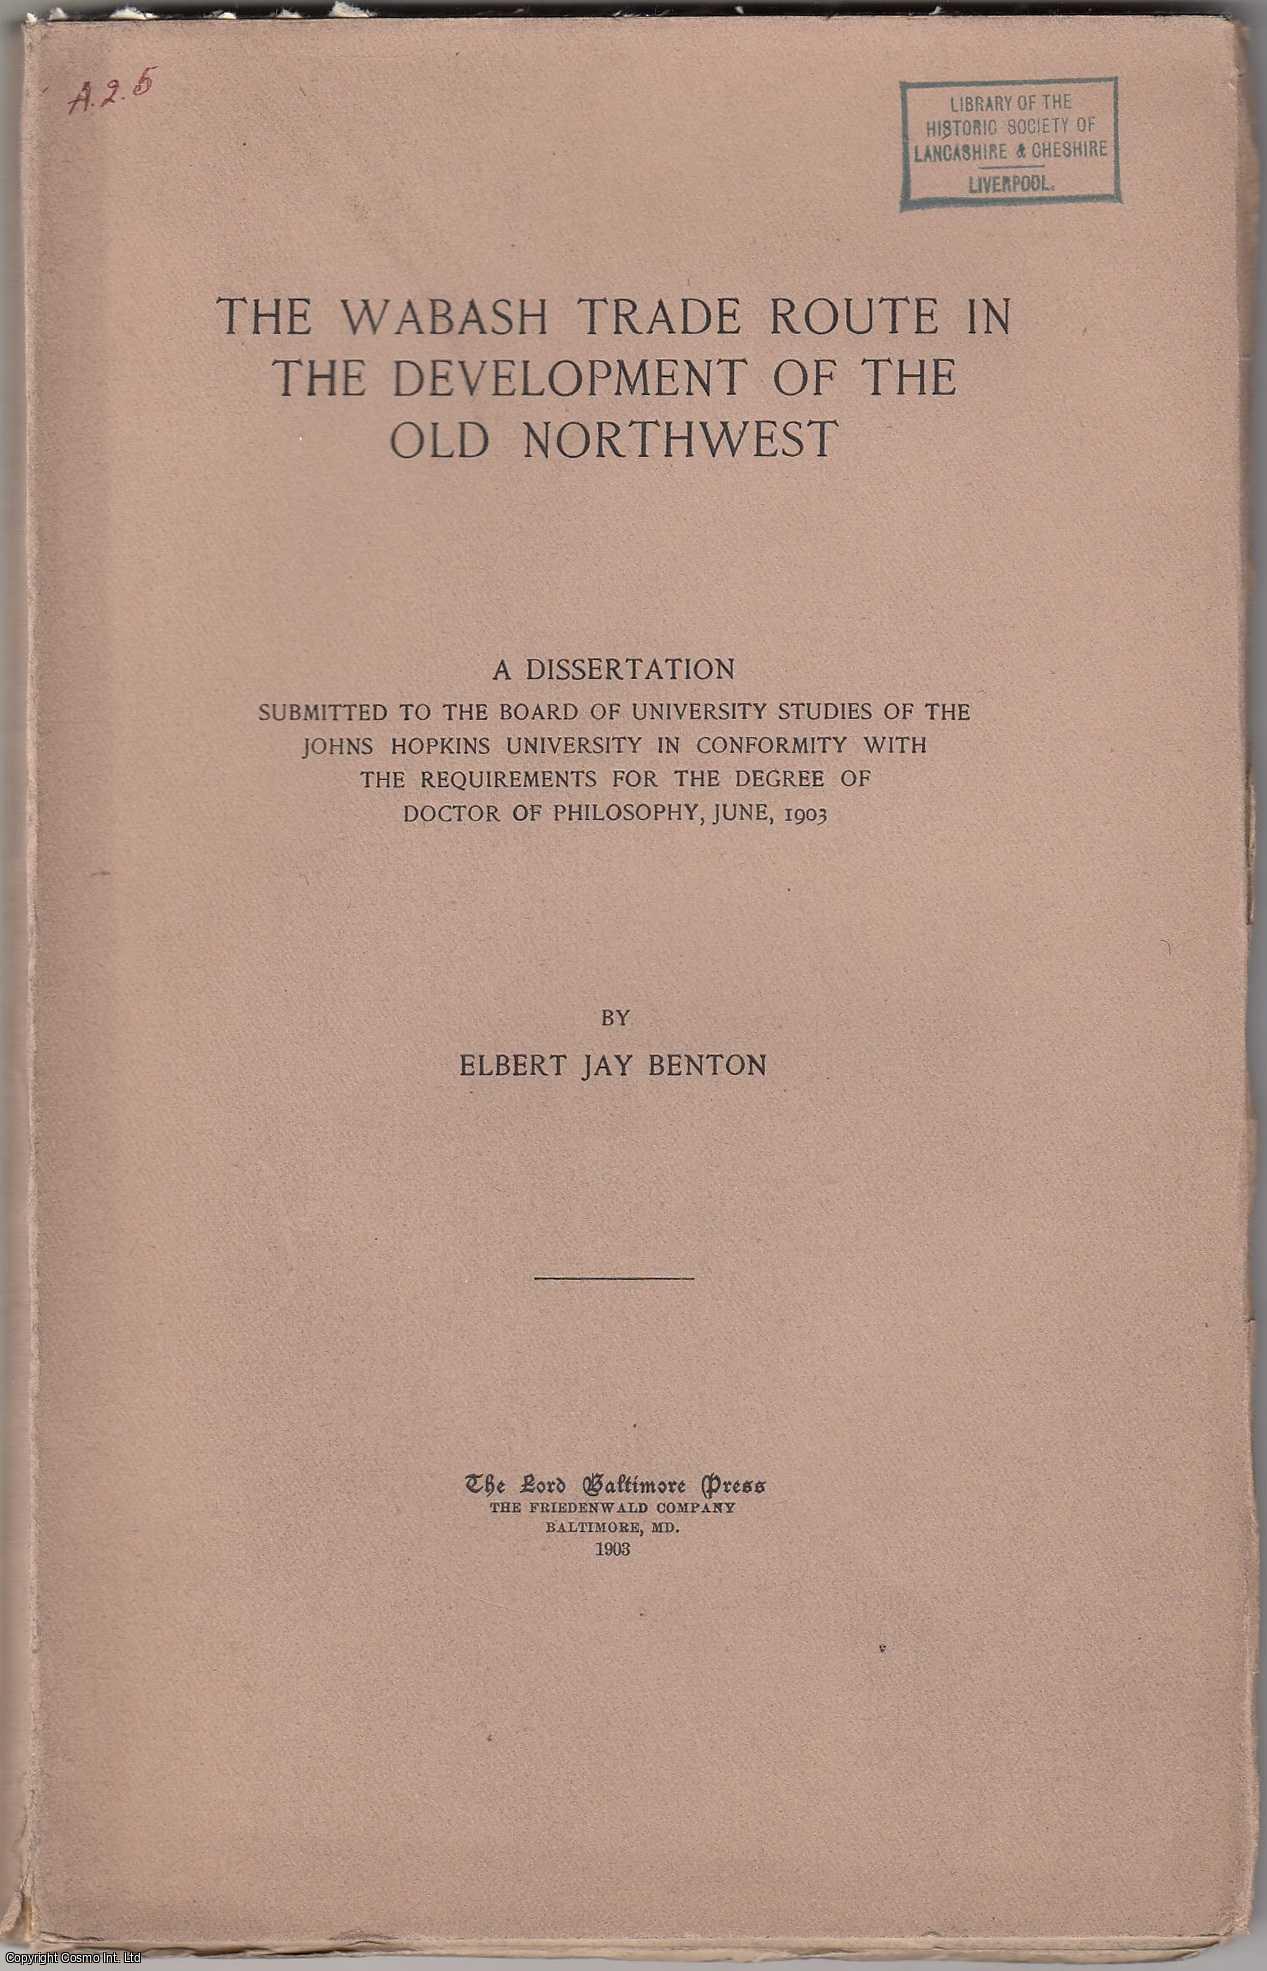 Elbert Jay Benton - [1903] The Wabash Trade Route in the Development of the Old Northwest.